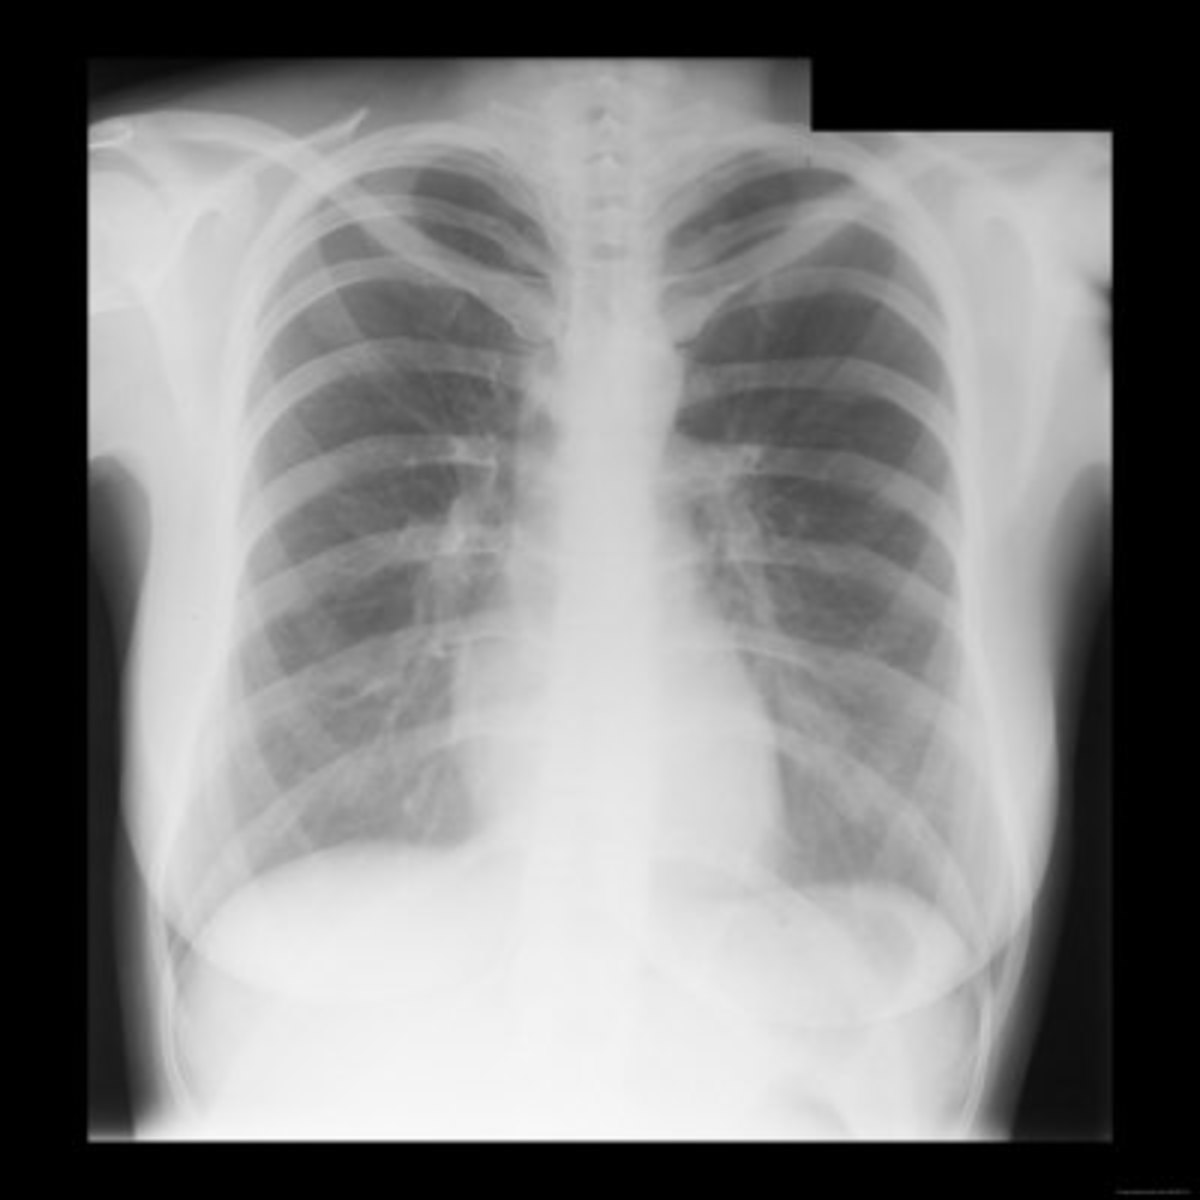 Reading The Chest X-Ray (Chest Radiography): Identifying A ...